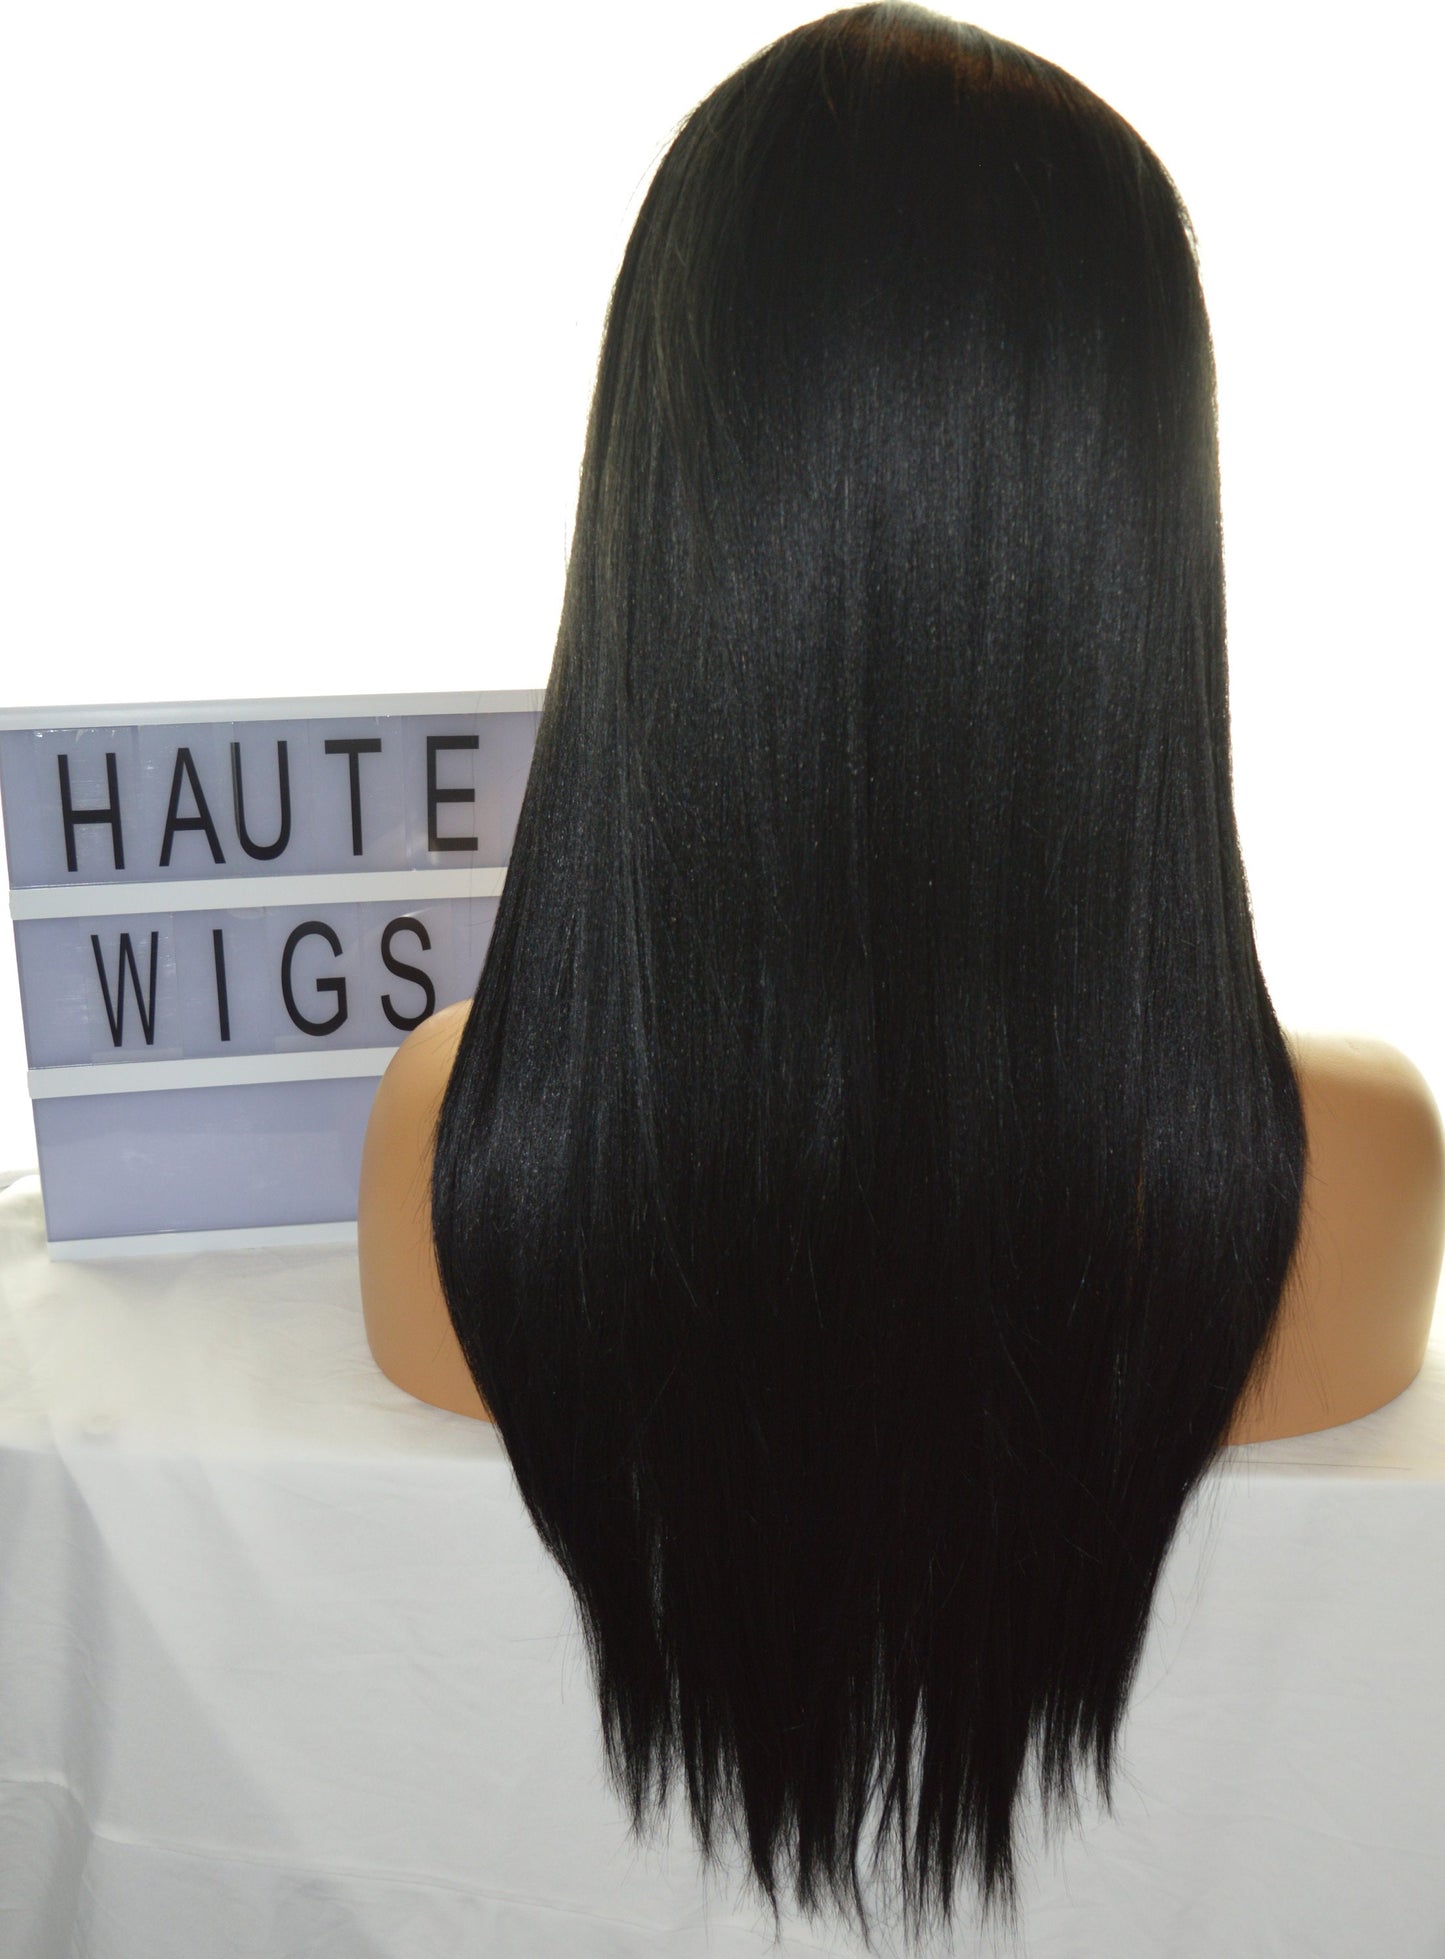 28 Inch Dark Black Wig Long Straight Thick High Density Womens Wig Human Hair Lace Front Wigs Realistic Beautiful Baby Hairs